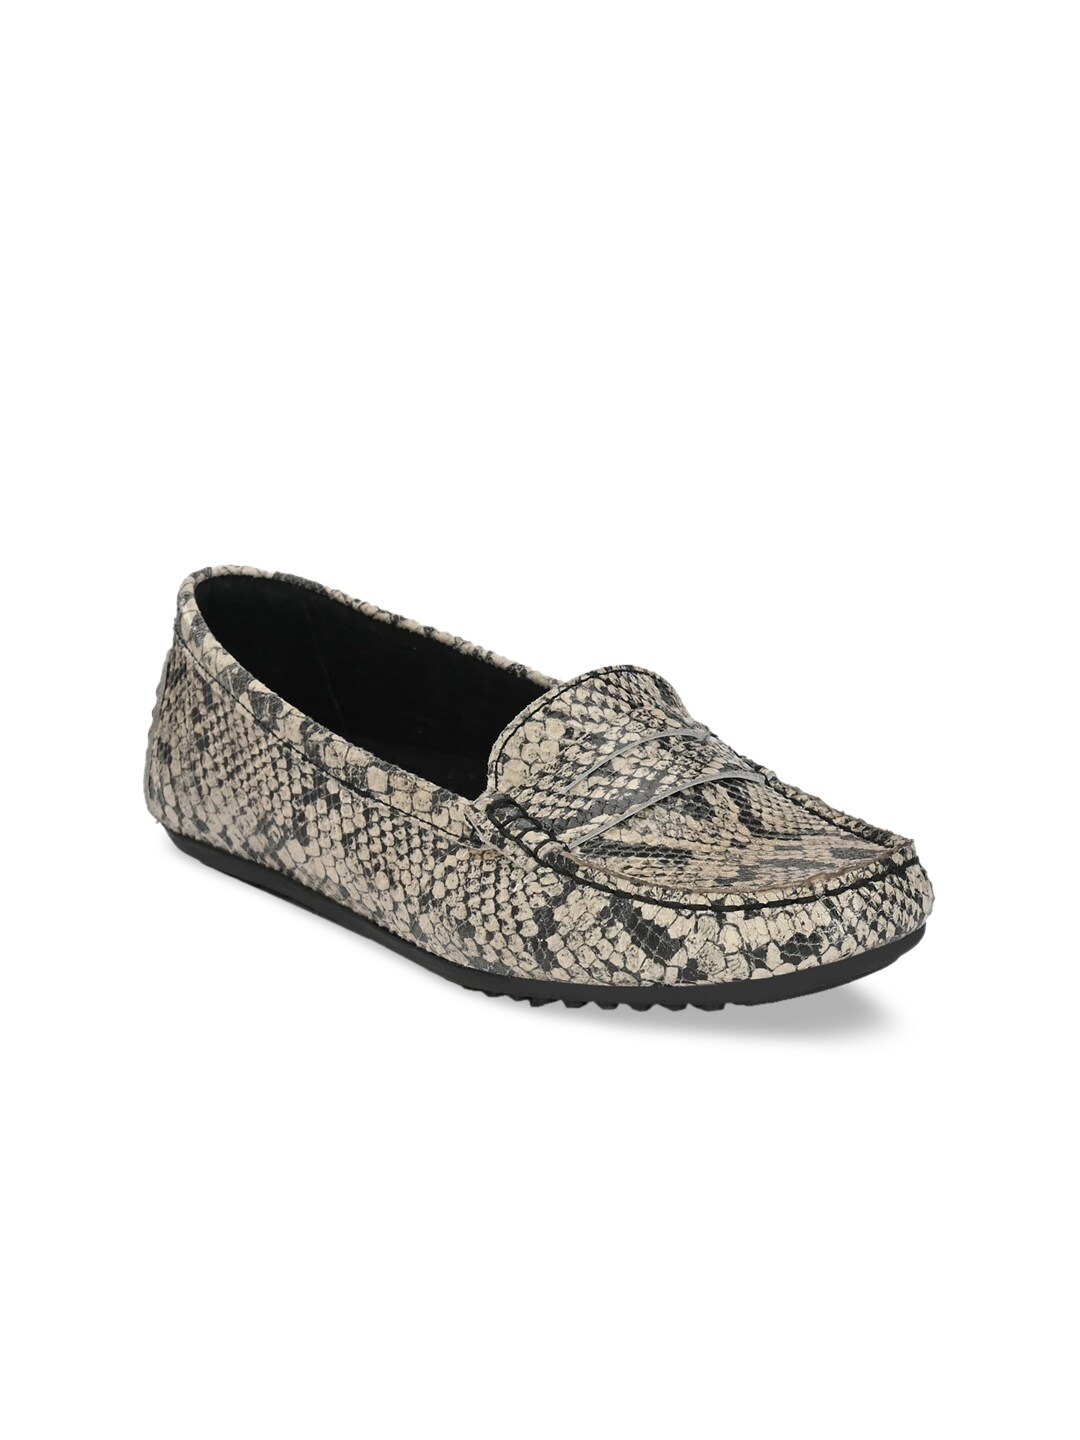 Carlo Romano Women Animal Printed Leather Loafers Price in India